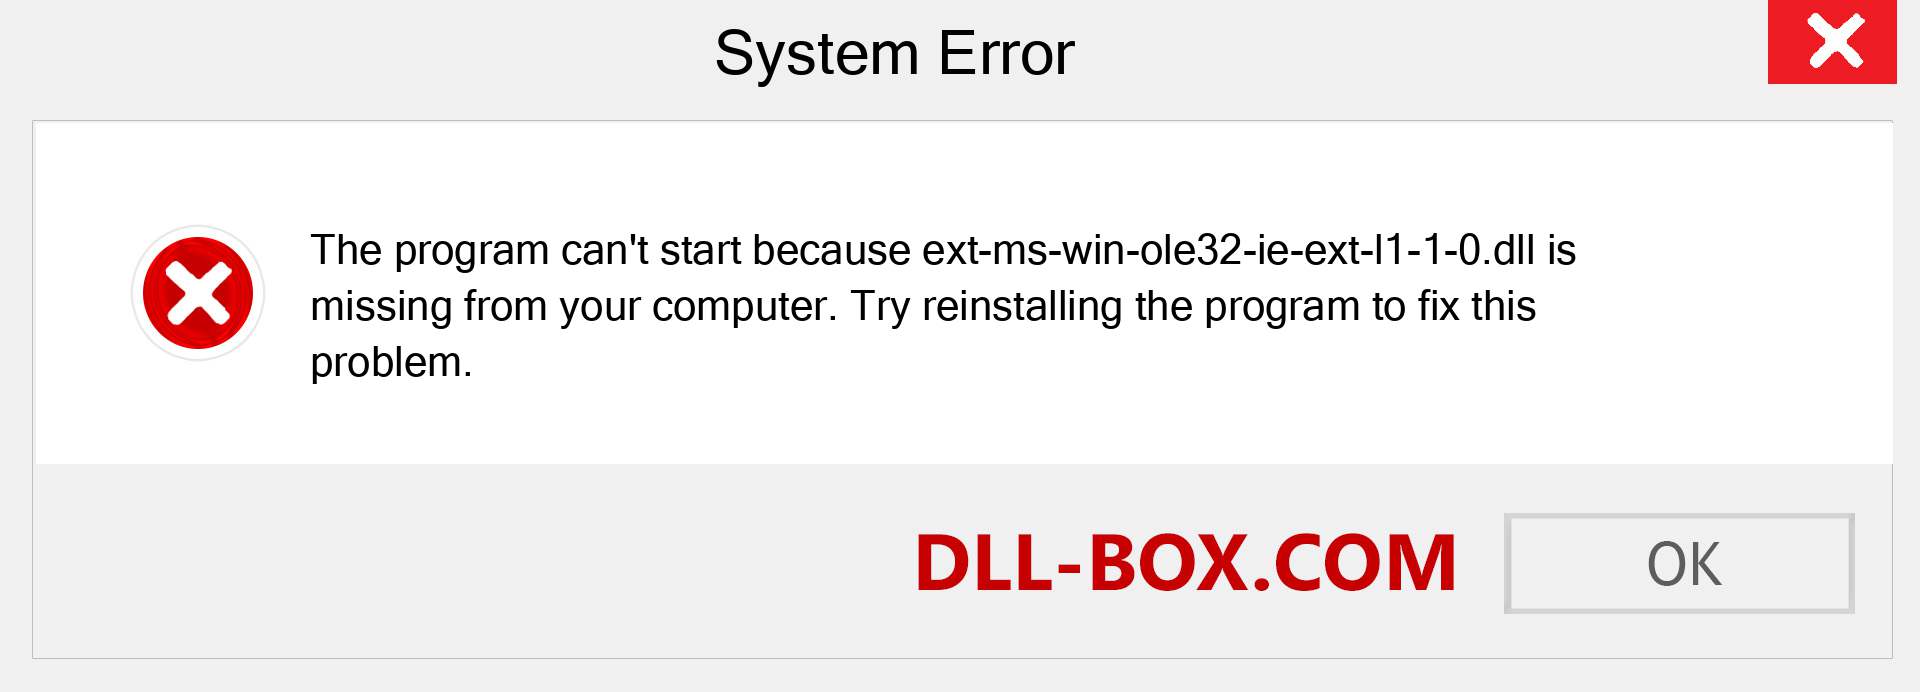  ext-ms-win-ole32-ie-ext-l1-1-0.dll file is missing?. Download for Windows 7, 8, 10 - Fix  ext-ms-win-ole32-ie-ext-l1-1-0 dll Missing Error on Windows, photos, images